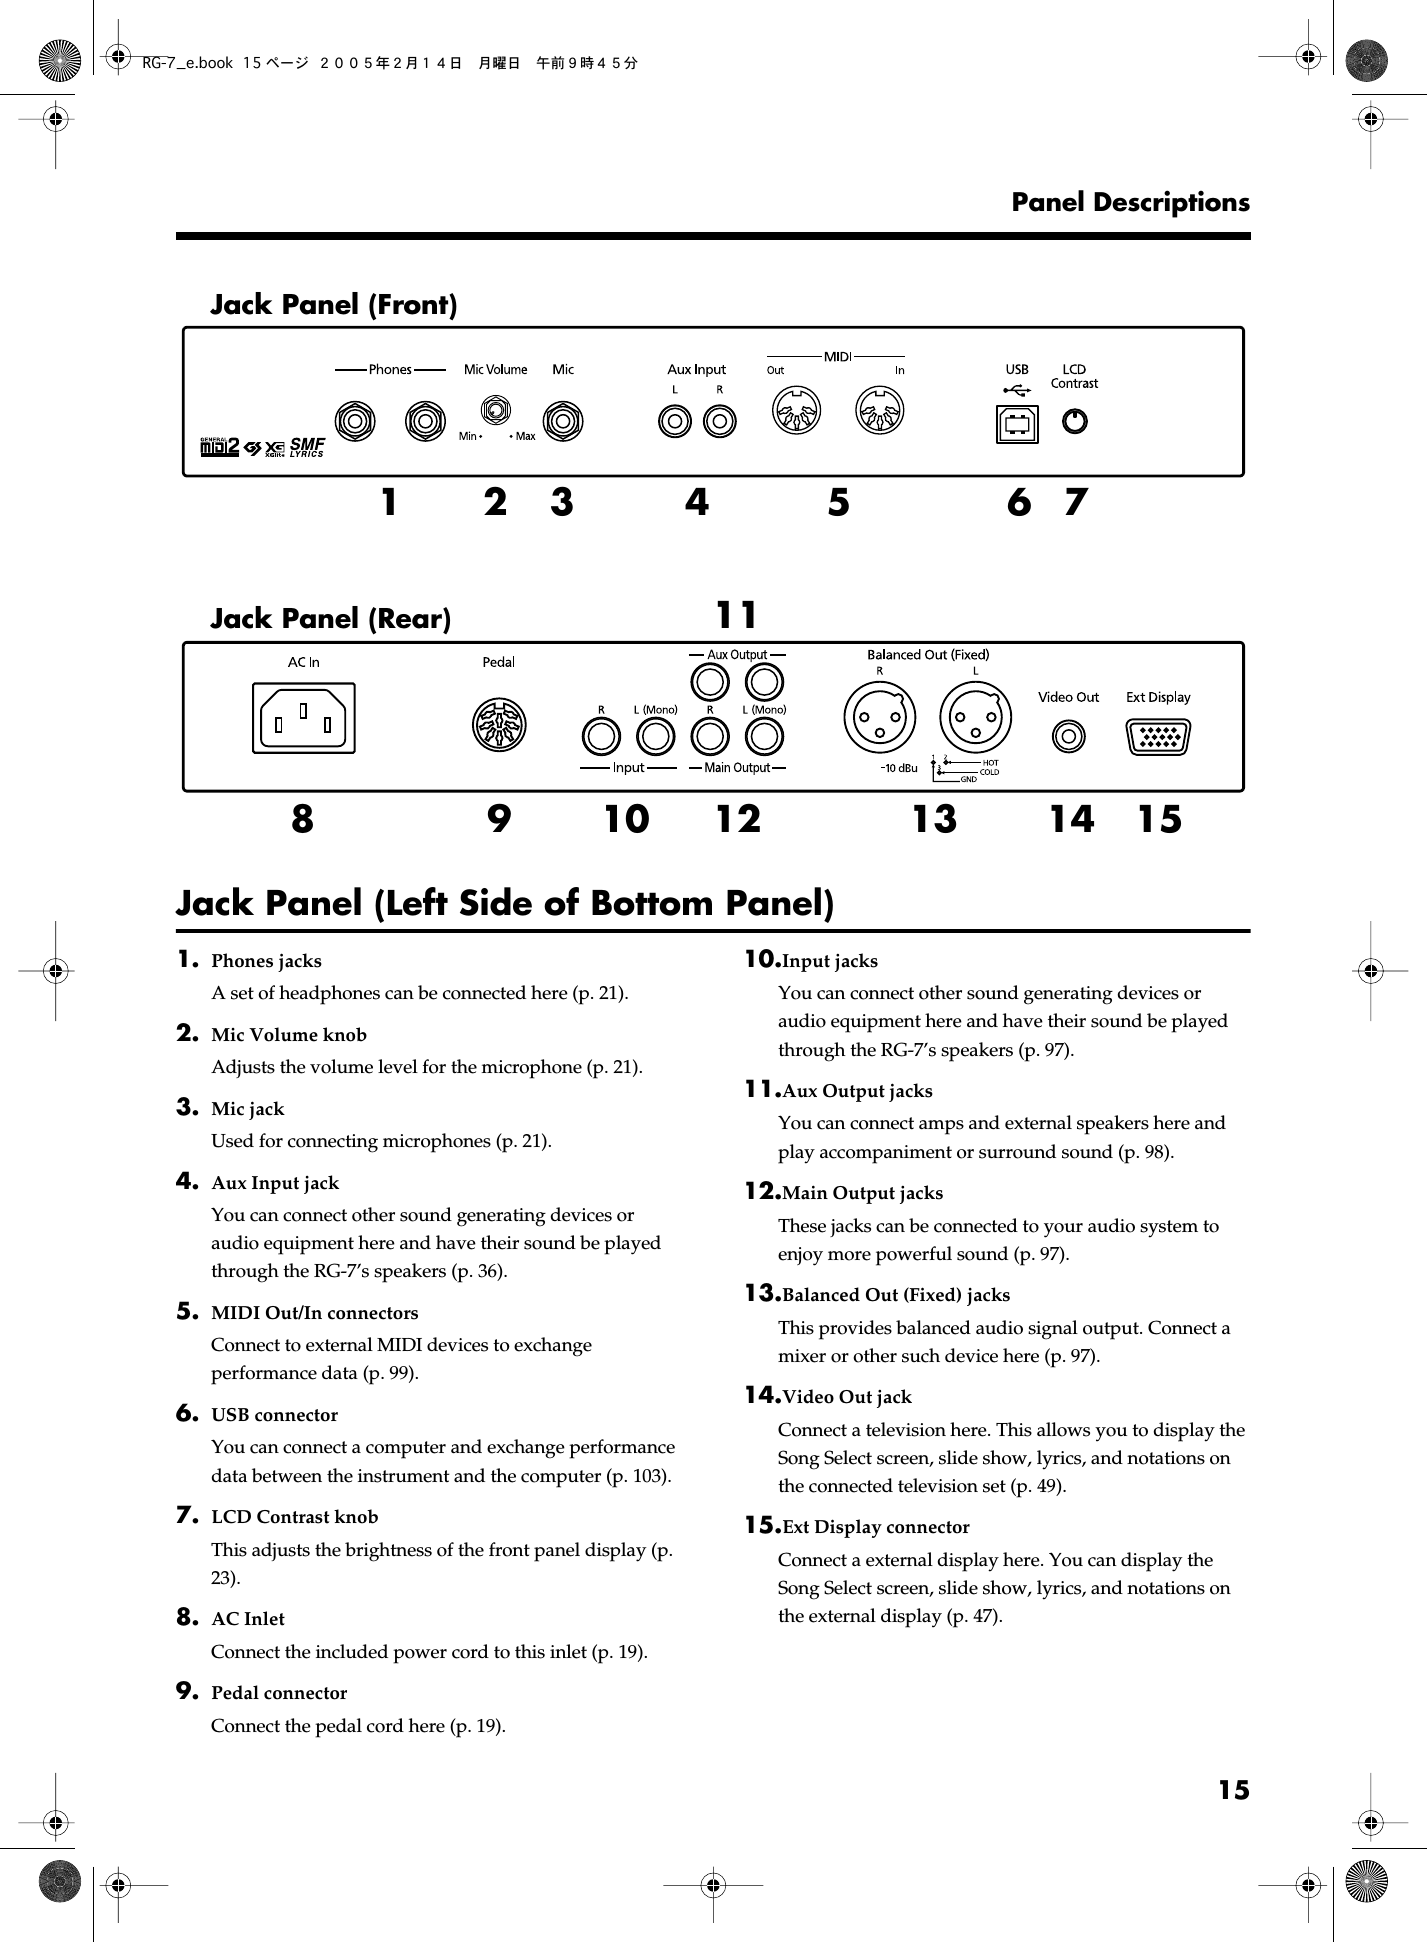  15Panel Descriptions Jack Panel (Left Side of Bottom Panel) 1. Phones jacks A set of headphones can be connected here (p. 21).  2. Mic Volume knob Adjusts the volume level for the microphone (p. 21). 3. Mic jack Used for connecting microphones (p. 21). 4. Aux Input jack You can connect other sound generating devices or audio equipment here and have their sound be played through the RG-7’s speakers (p. 36). 5. MIDI Out/In connectors Connect to external MIDI devices to exchange performance data (p. 99).  6. USB connector You can connect a computer and exchange performance data between the instrument and the computer (p. 103). 7. LCD Contrast knob This adjusts the brightness of the front panel display (p. 23). 8. AC Inlet Connect the included power cord to this inlet (p. 19). 9. Pedal connector Connect the pedal cord here (p. 19). 10. Input jacks You can connect other sound generating devices or audio equipment here and have their sound be played through the RG-7’s speakers (p. 97). 11. Aux Output jacks You can connect amps and external speakers here and play accompaniment or surround sound (p. 98). 12. Main Output jacks These jacks can be connected to your audio system to enjoy more powerful sound (p. 97). 13. Balanced Out (Fixed) jacks This provides balanced audio signal output. Connect a mixer or other such device here (p. 97). 14. Video Out jack Connect a television here. This allows you to display the Song Select screen, slide show, lyrics, and notations on the connected television set (p. 49). 15. Ext Display connector Connect a external display here. You can display the Song Select screen, slide show, lyrics, and notations on the external display (p. 47).8123 4 5 67910121113 14 15Jack Panel (Front)Jack Panel (Rear)RG-7_e.book 15 ページ ２００５年２月１４日　月曜日　午前９時４５分